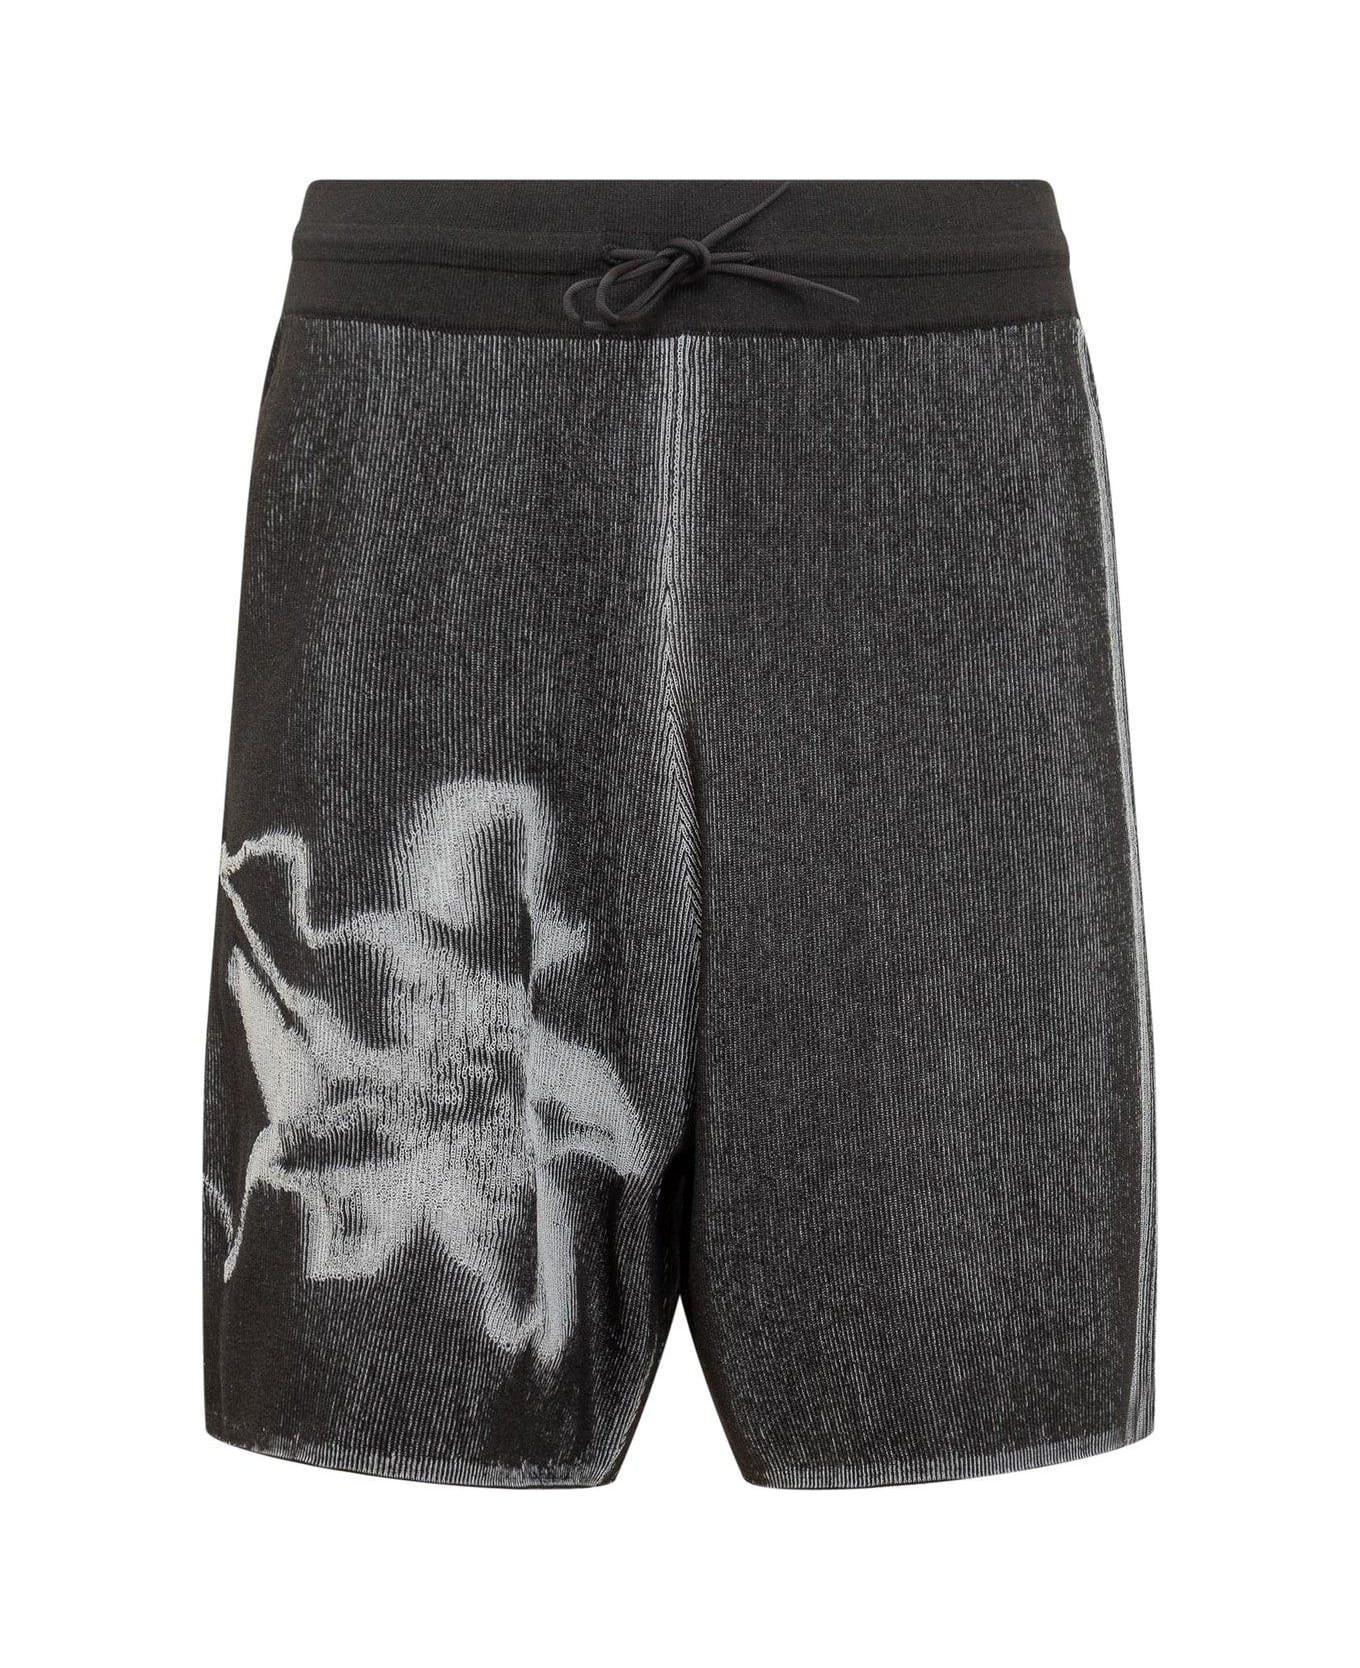 Y-3 Gfx Relaxed Fit Knit Shorts